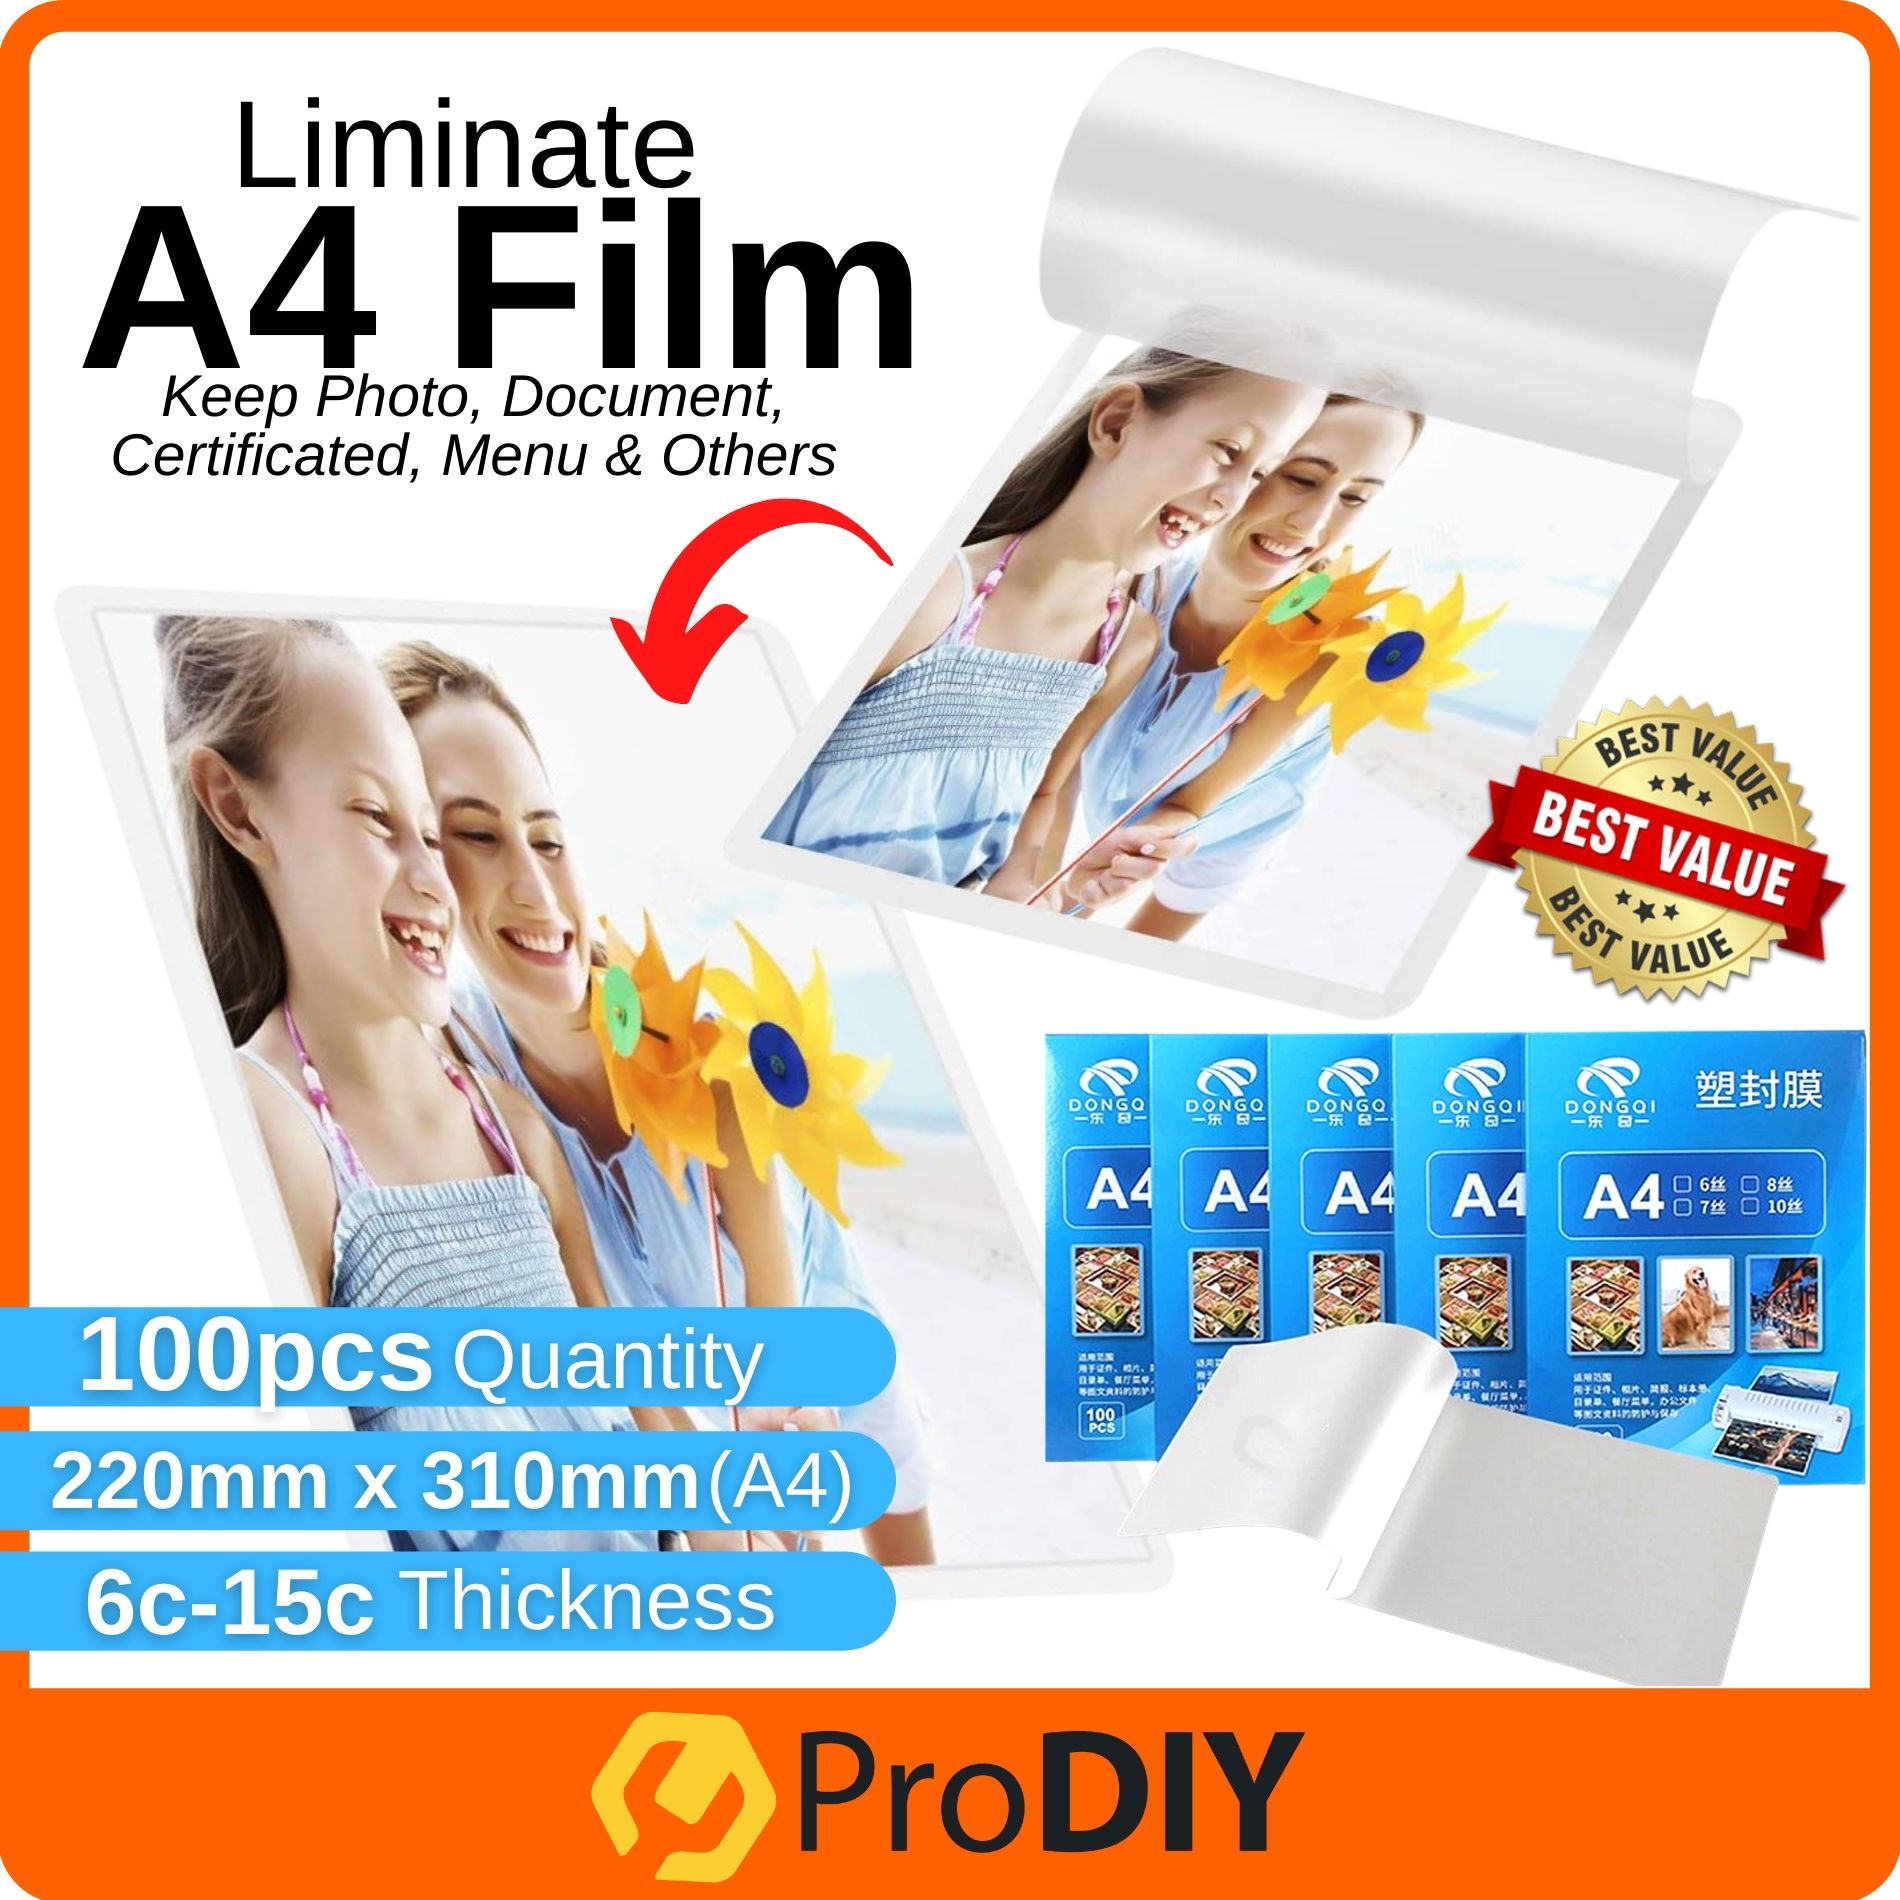 100PCS / 1PACK A4 Laminated Film Household School Keep Photo Document Cetificated Plastic Laminated Kertas 220 x 310mm